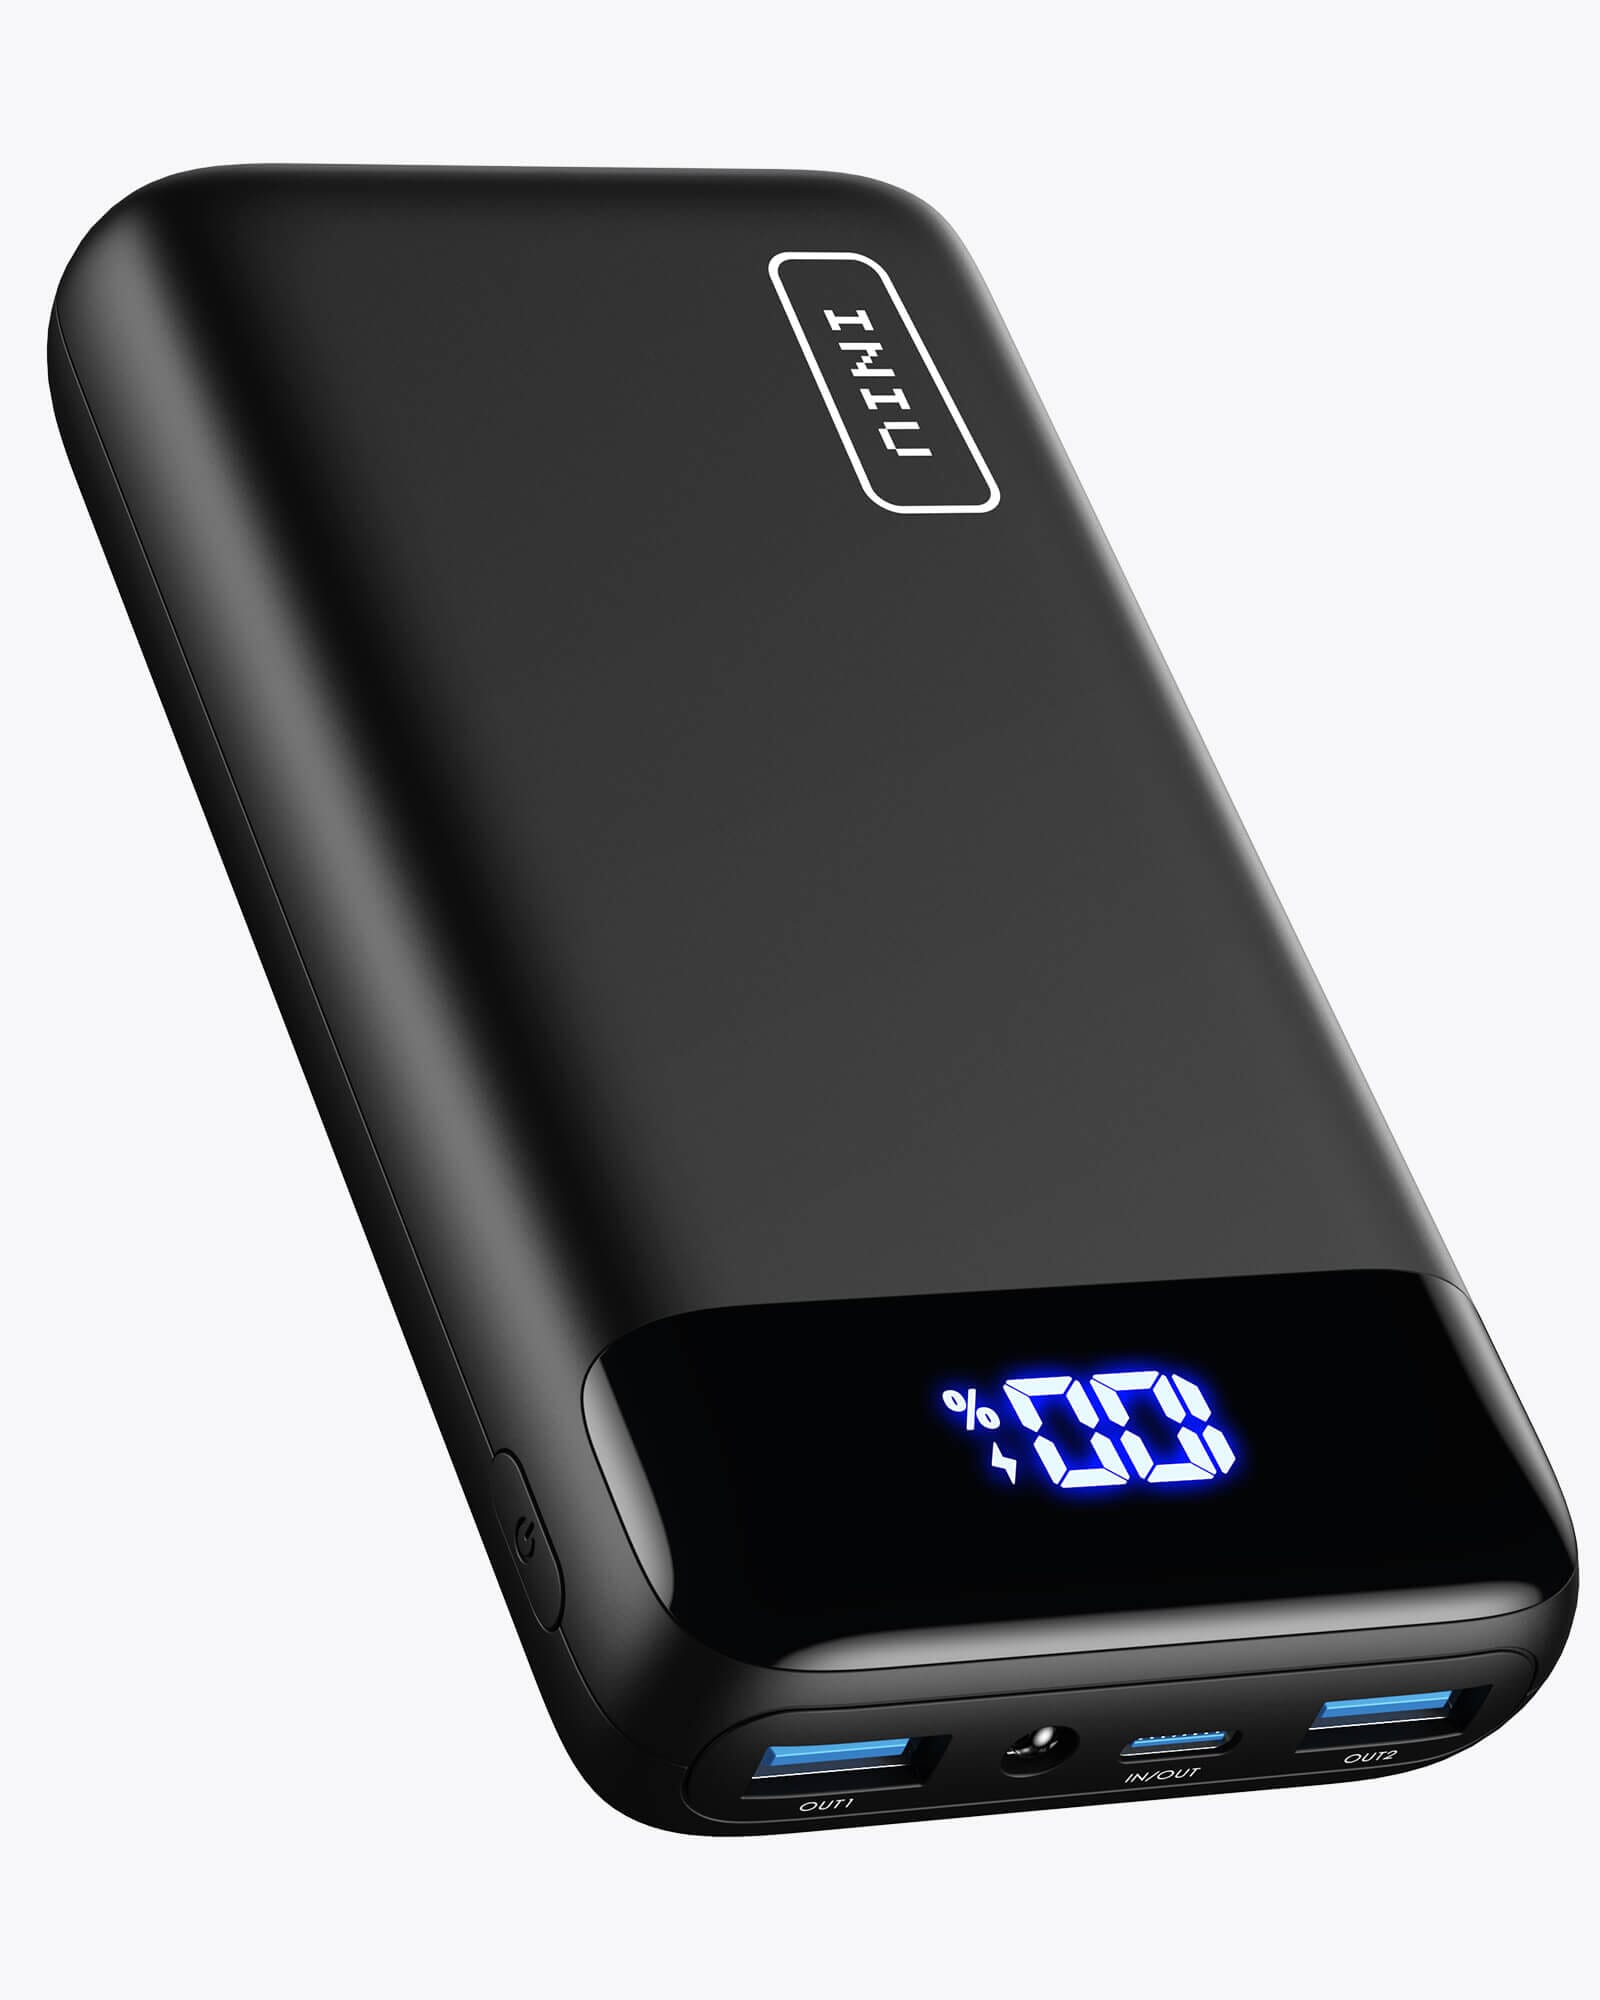 3 In 1 Portable Charger 20000 mAh, Best QC 3.0 Power Bank With Led Light  Display